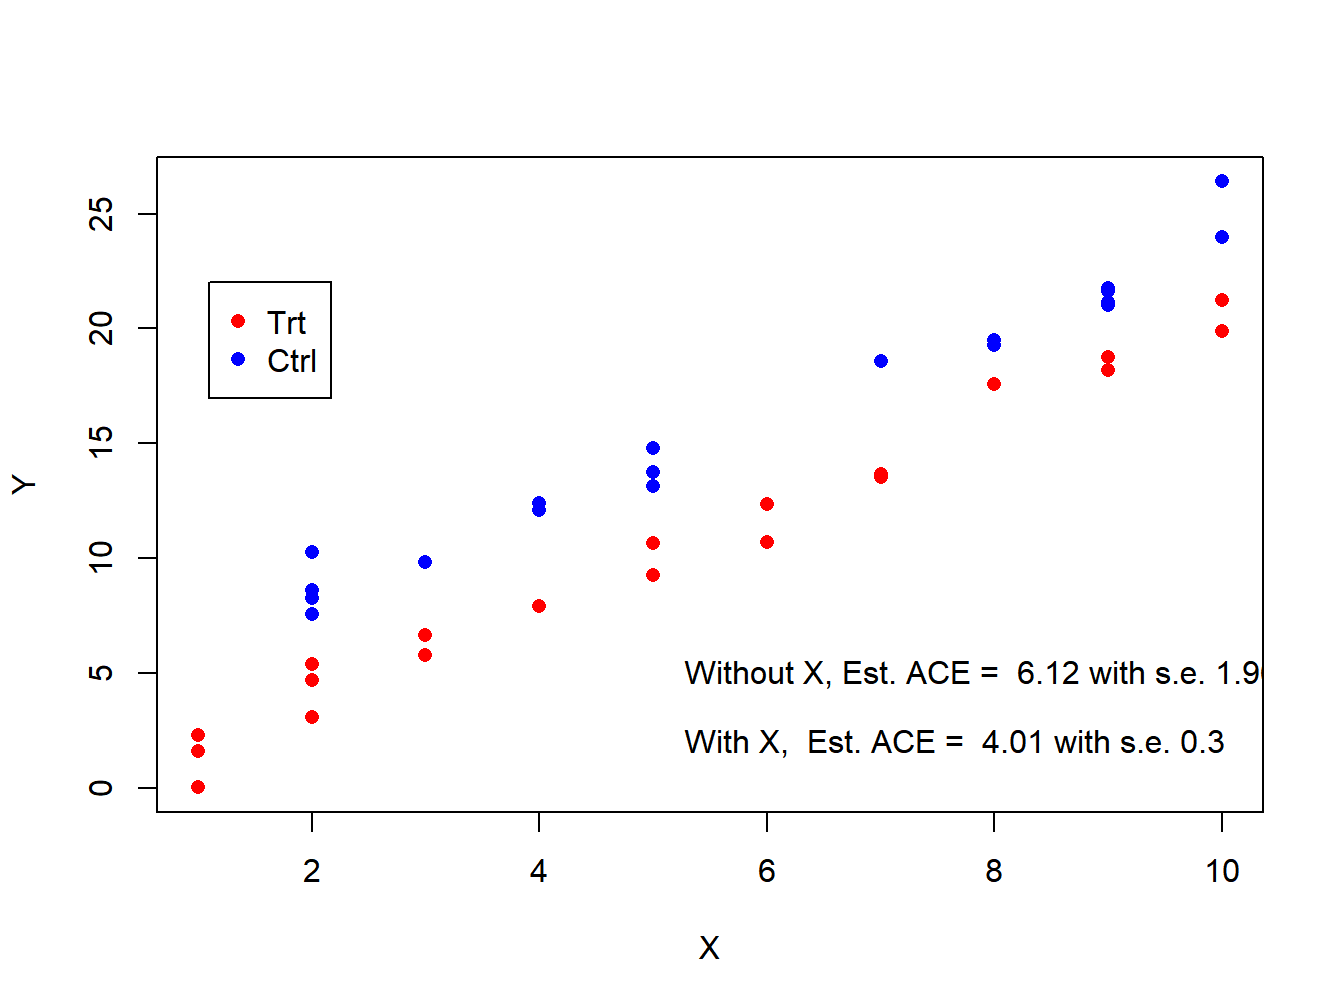 Estimation of ACE with and without adjusting for X